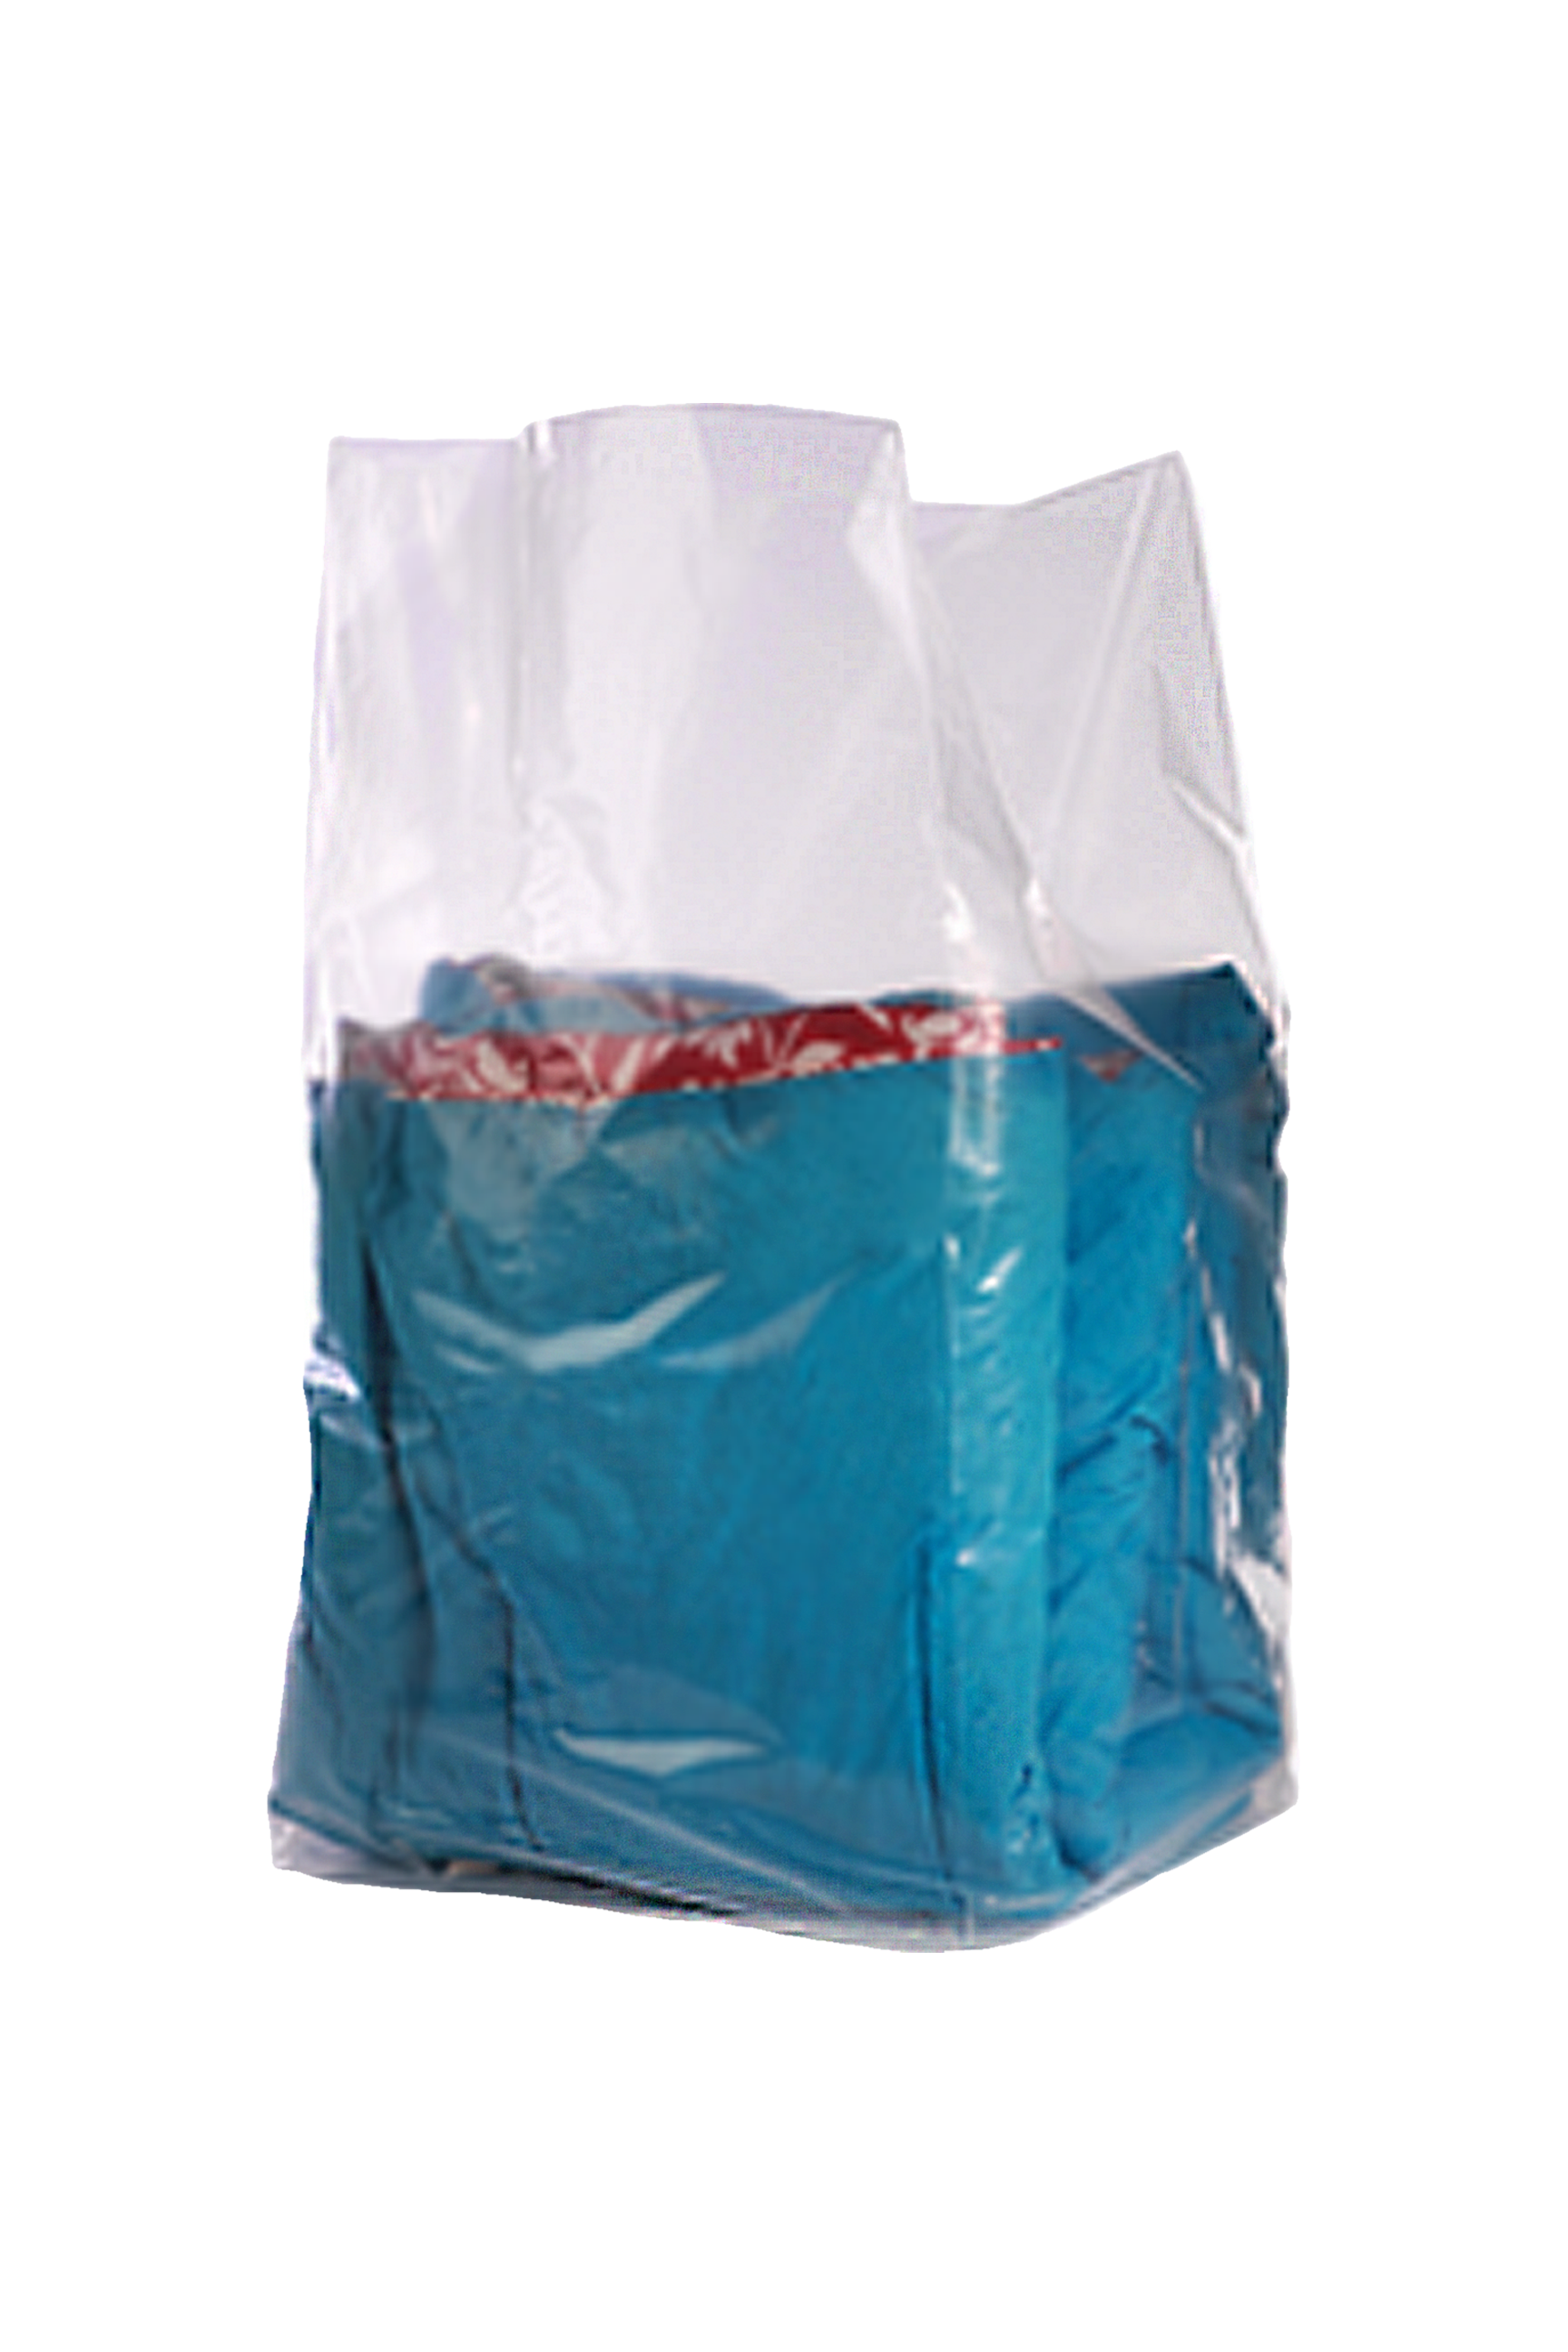 Moisture Barrier Bags, FDA Approved Bags